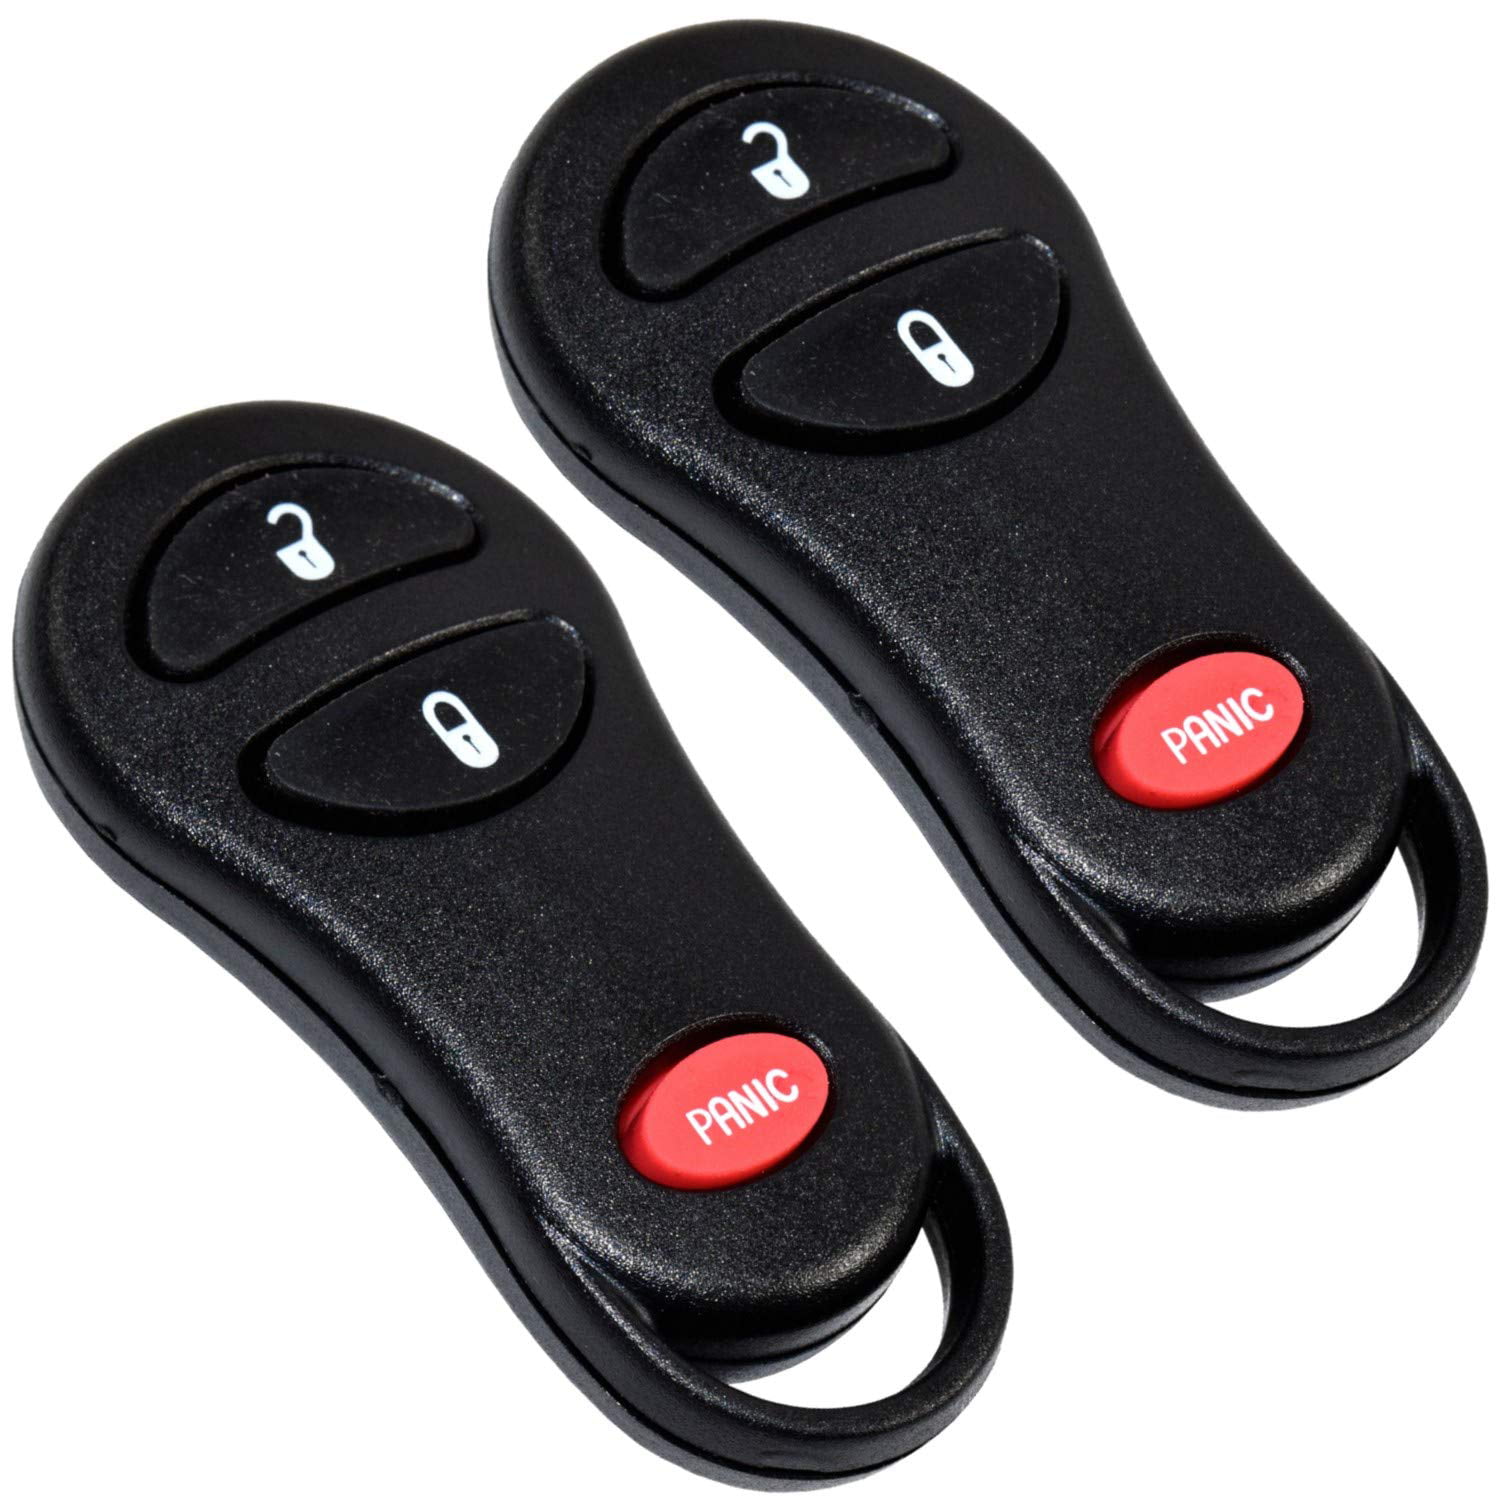 2 Car Key Fob Remote Keyless Shell Case Pad For 1999 2000 2001 Plymouth Prowler 